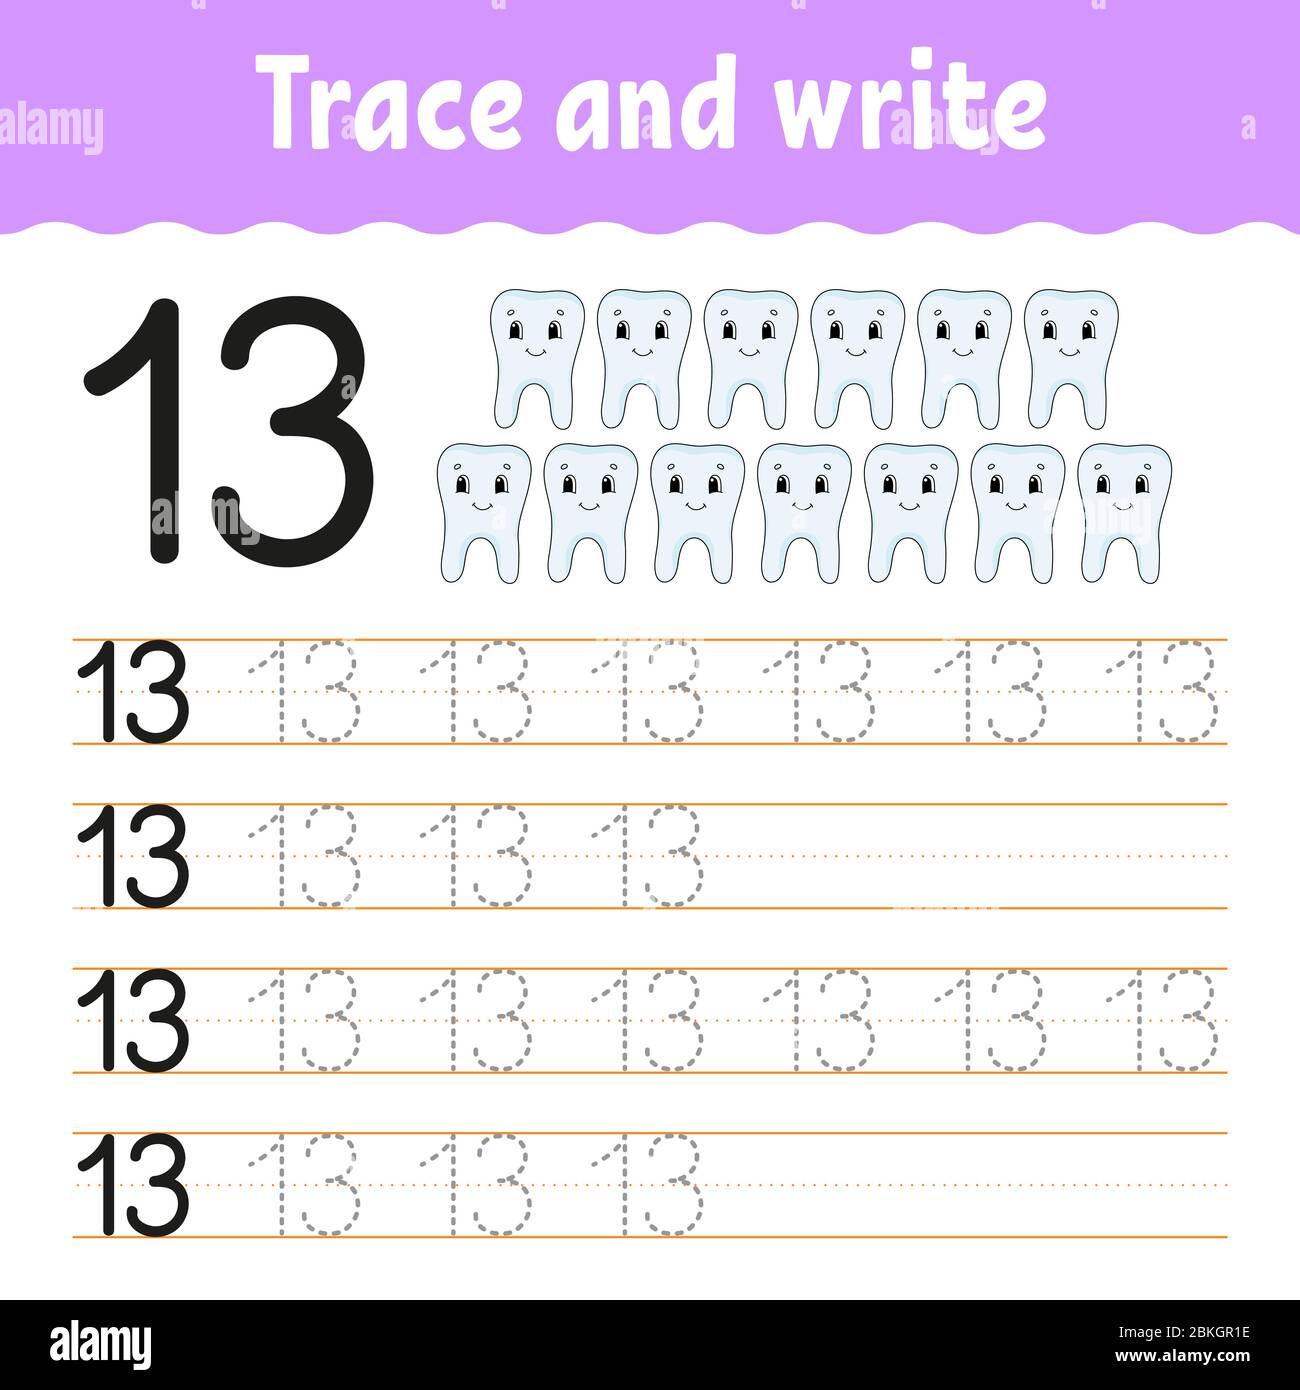 Trace and write. Number 11. Handwriting practice. Learning numbers